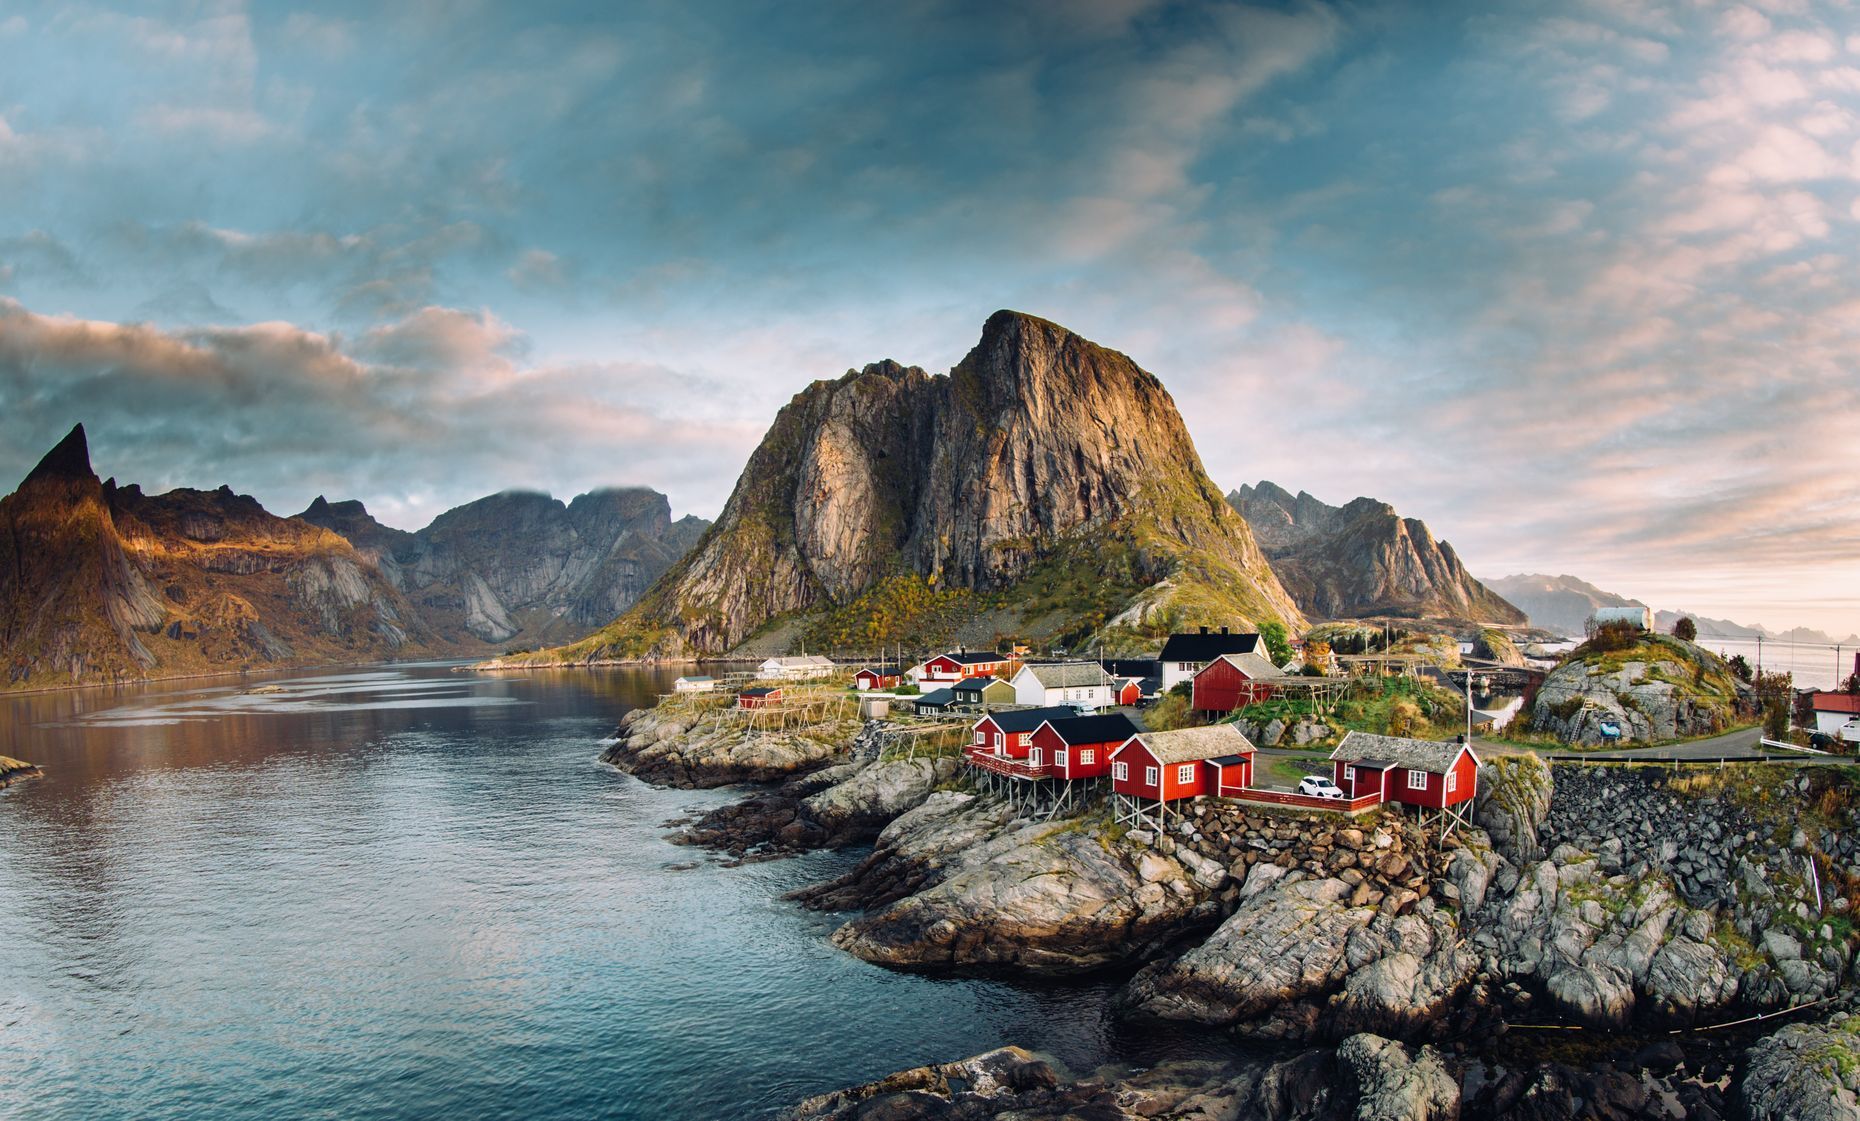 Offering scenery worthy of the best postcards, the <a href="https://www.lofotenlights.com/lofoten-islands/" rel="noreferrer noopener">Lofoten Islands</a> are a natural paradise of breathtaking beauty. Known for its picturesque fishing villages, this sublime archipelago is also home to several stunning beaches like Haukland and Unstad. The Lofoten Islands are also a great place to see the northern lights, and despite their proximity to the Arctic Circle, the Gulf Stream keeps temperatures generally mild.